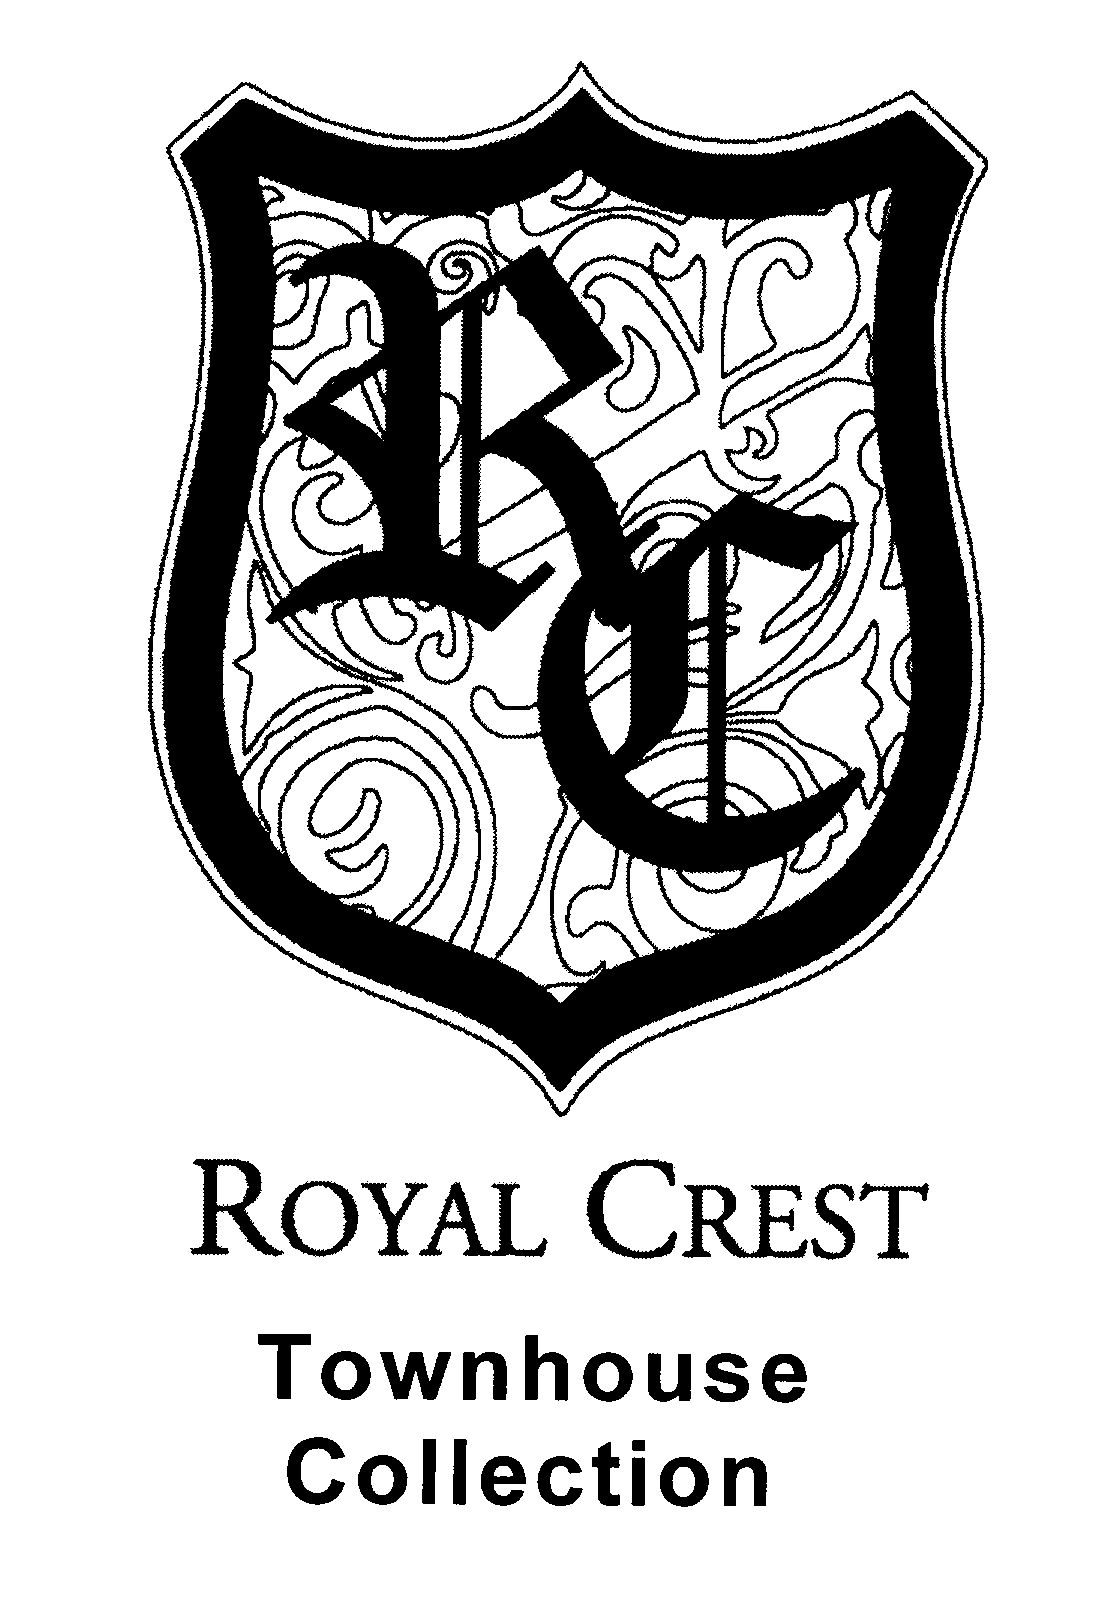  RC ROYAL CREST TOWNHOUSE COLLECTION